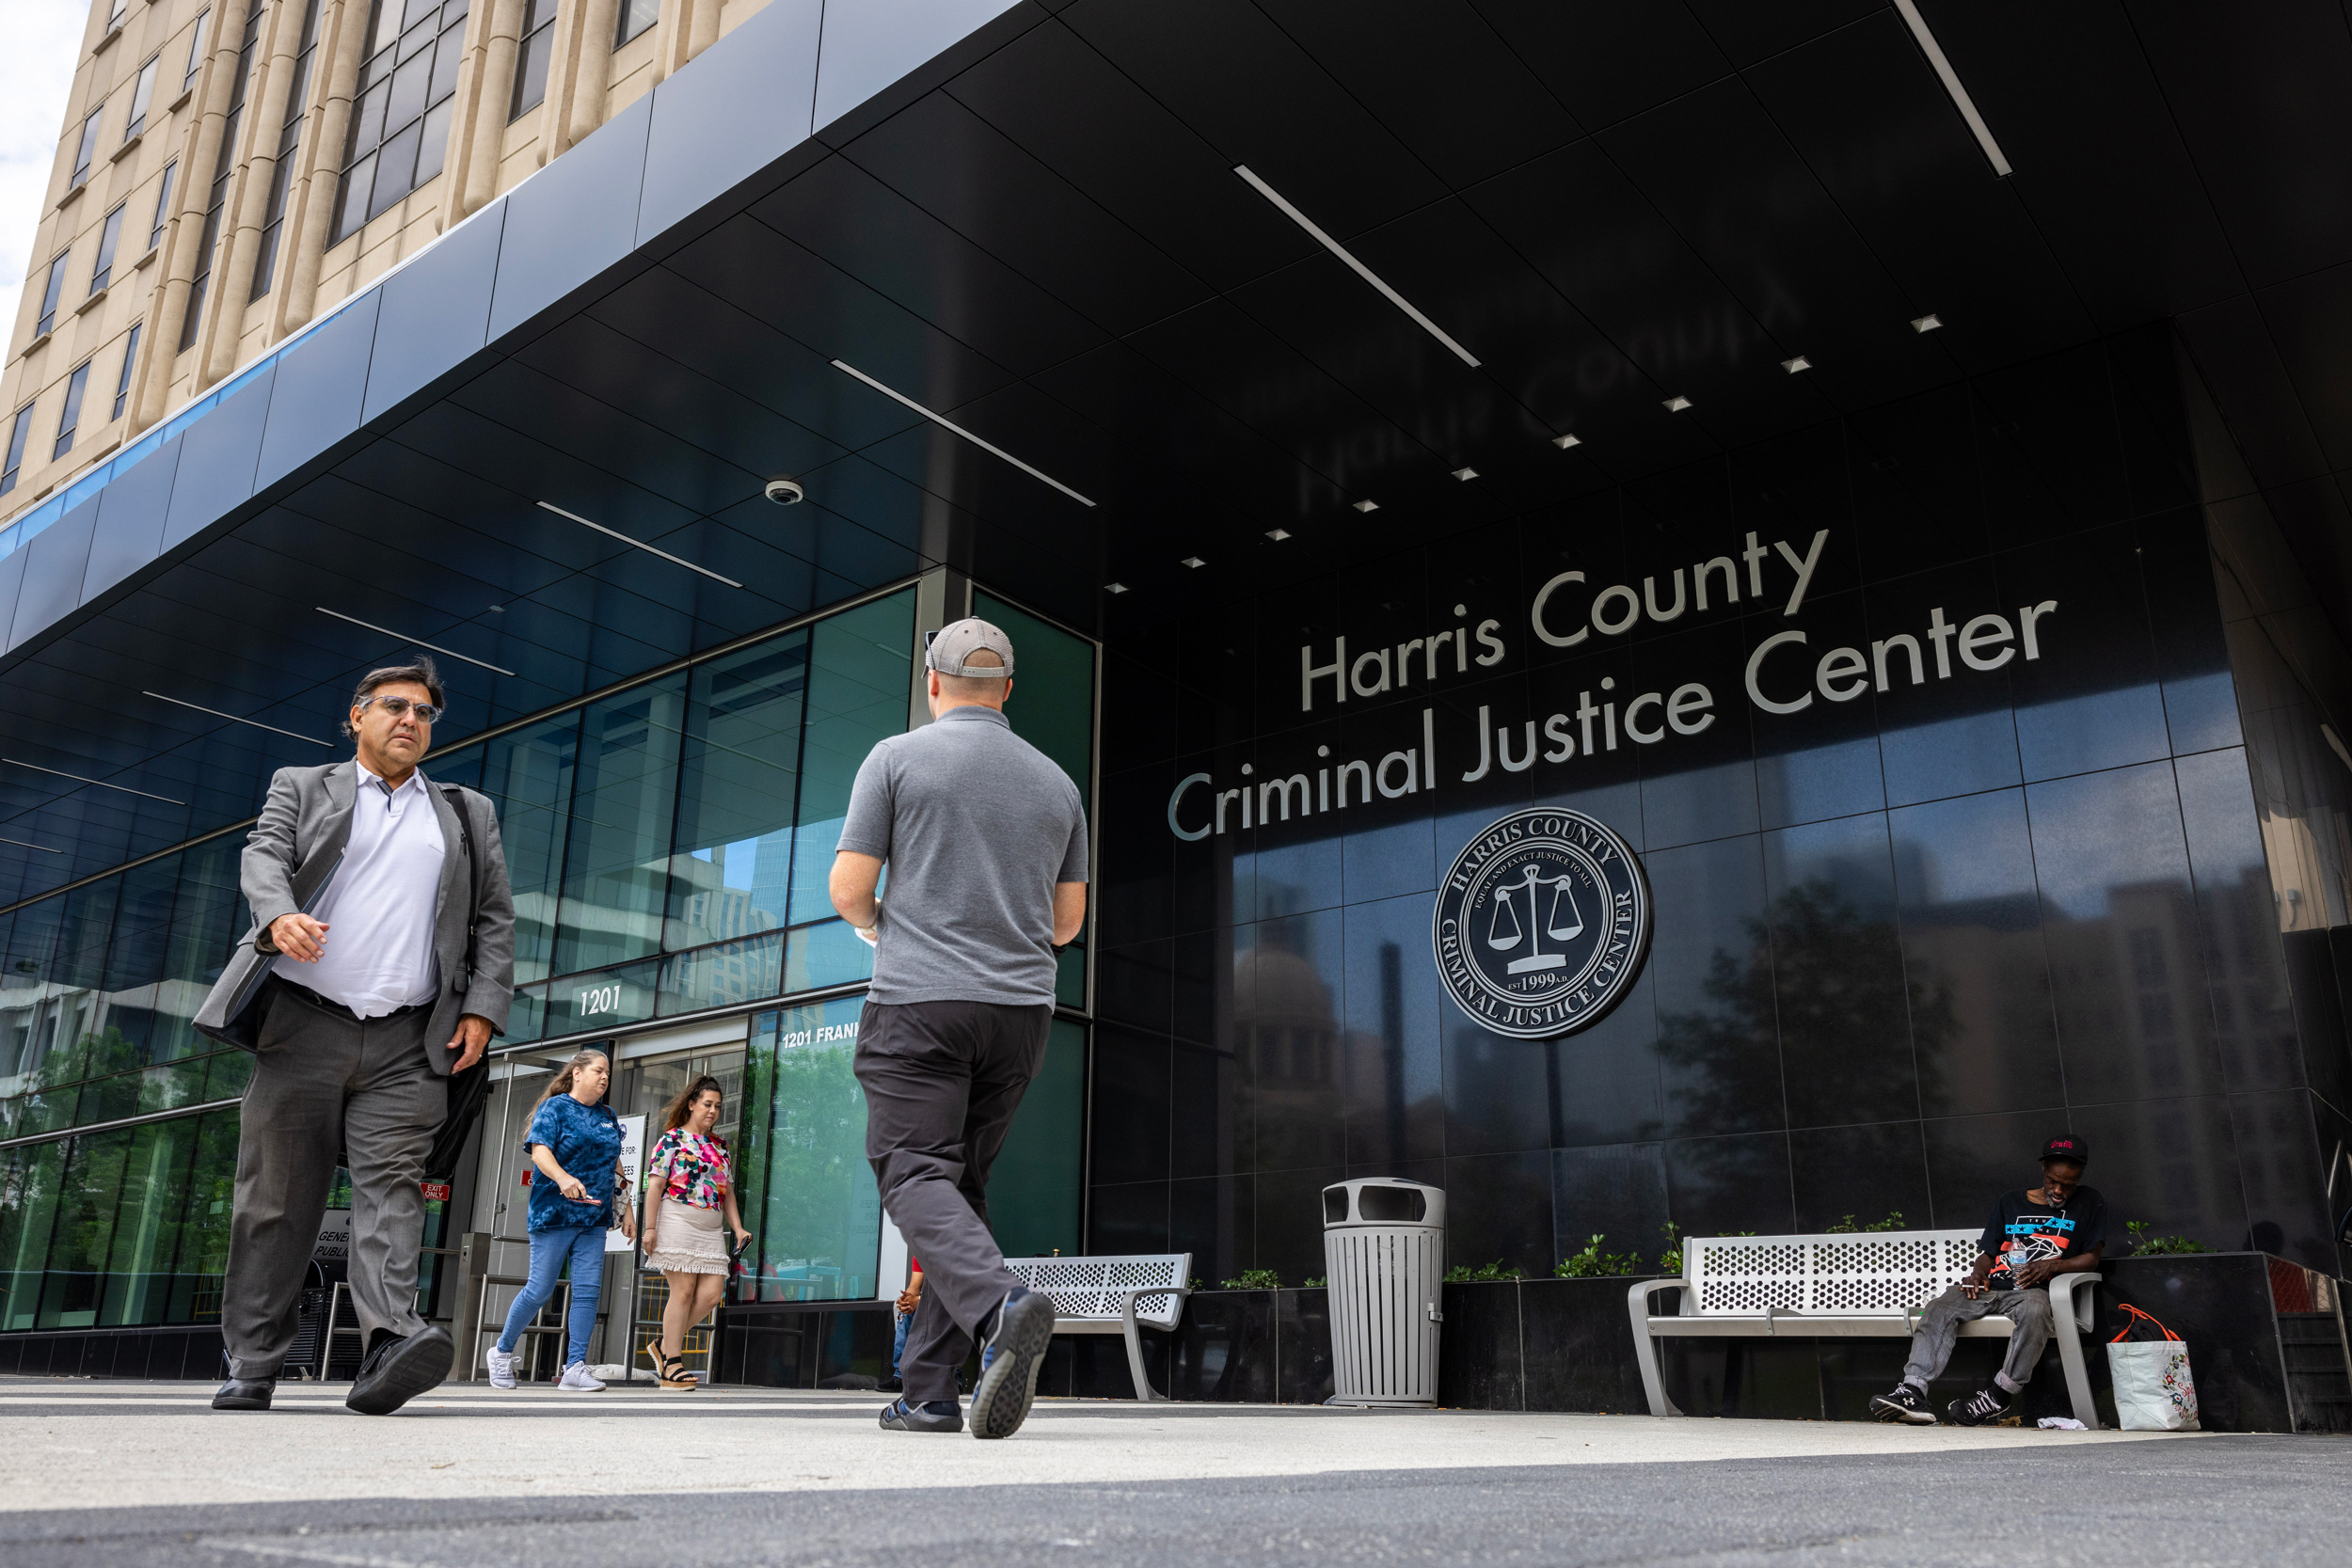 The Harris County Criminal Justice Center in downtown Houston